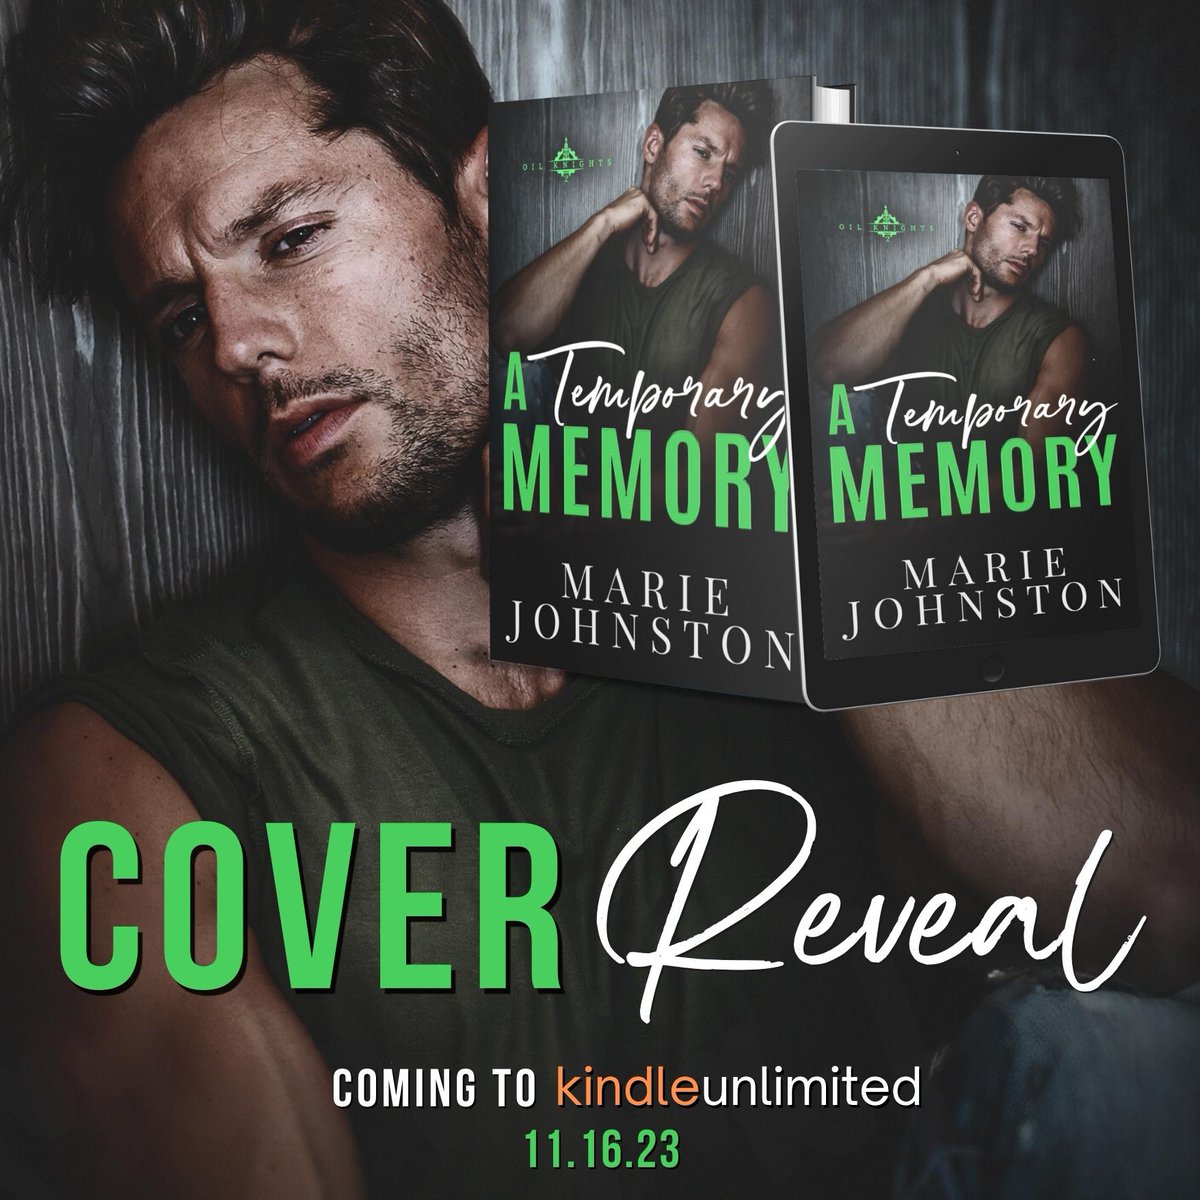 ✨It’s cover reveal day for A TEMPORARY MEMORY by @mjohnstonwriter coming November 16! #PreOrderHere bit.ly/45zfq3a ✨Influencers’ sign up here to promote this awesome release: bit.ly/45ReE1H #coverreveal #singledad #nanny #smalltown #theauthoragency